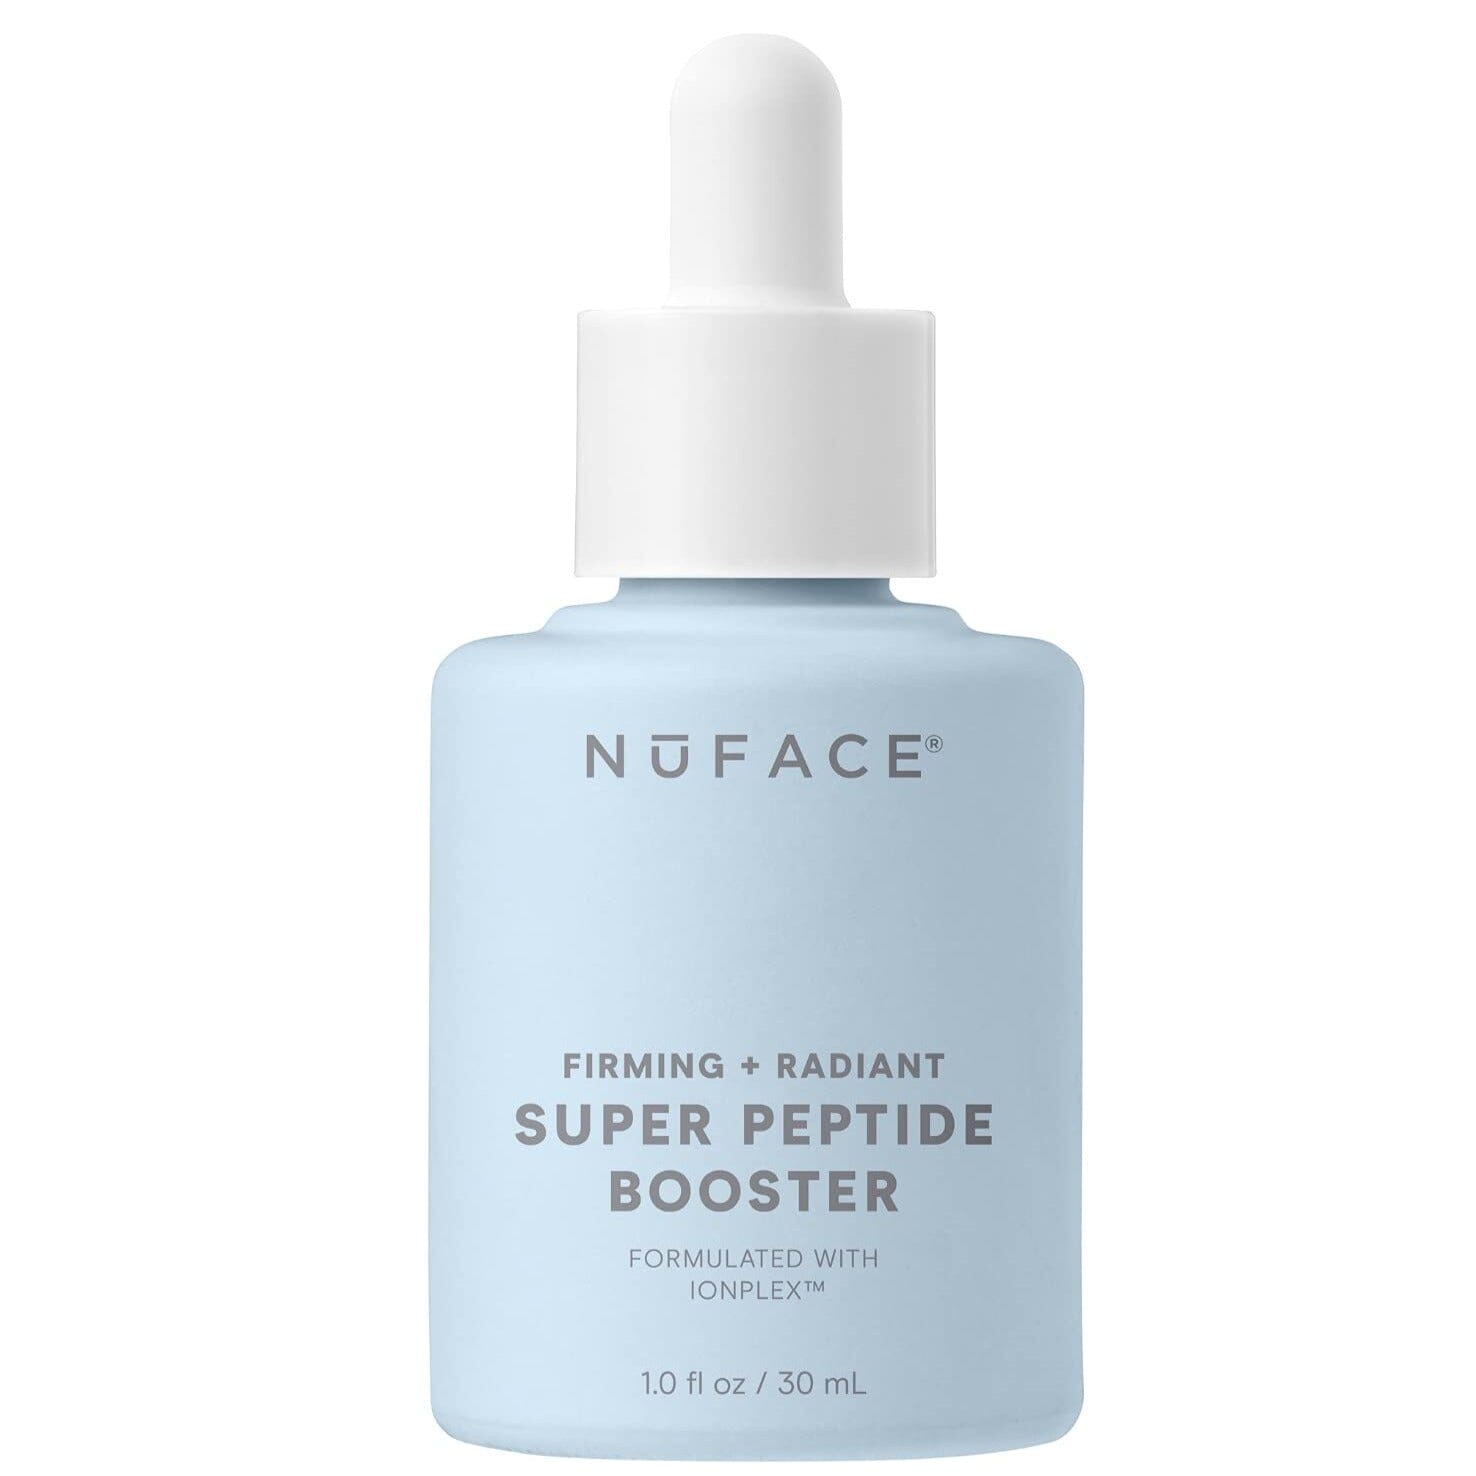 NuFACE Firming + Radiant Super Peptide Booster Serum NuFACE 1.0 fl oz Shop at Exclusive Beauty Club